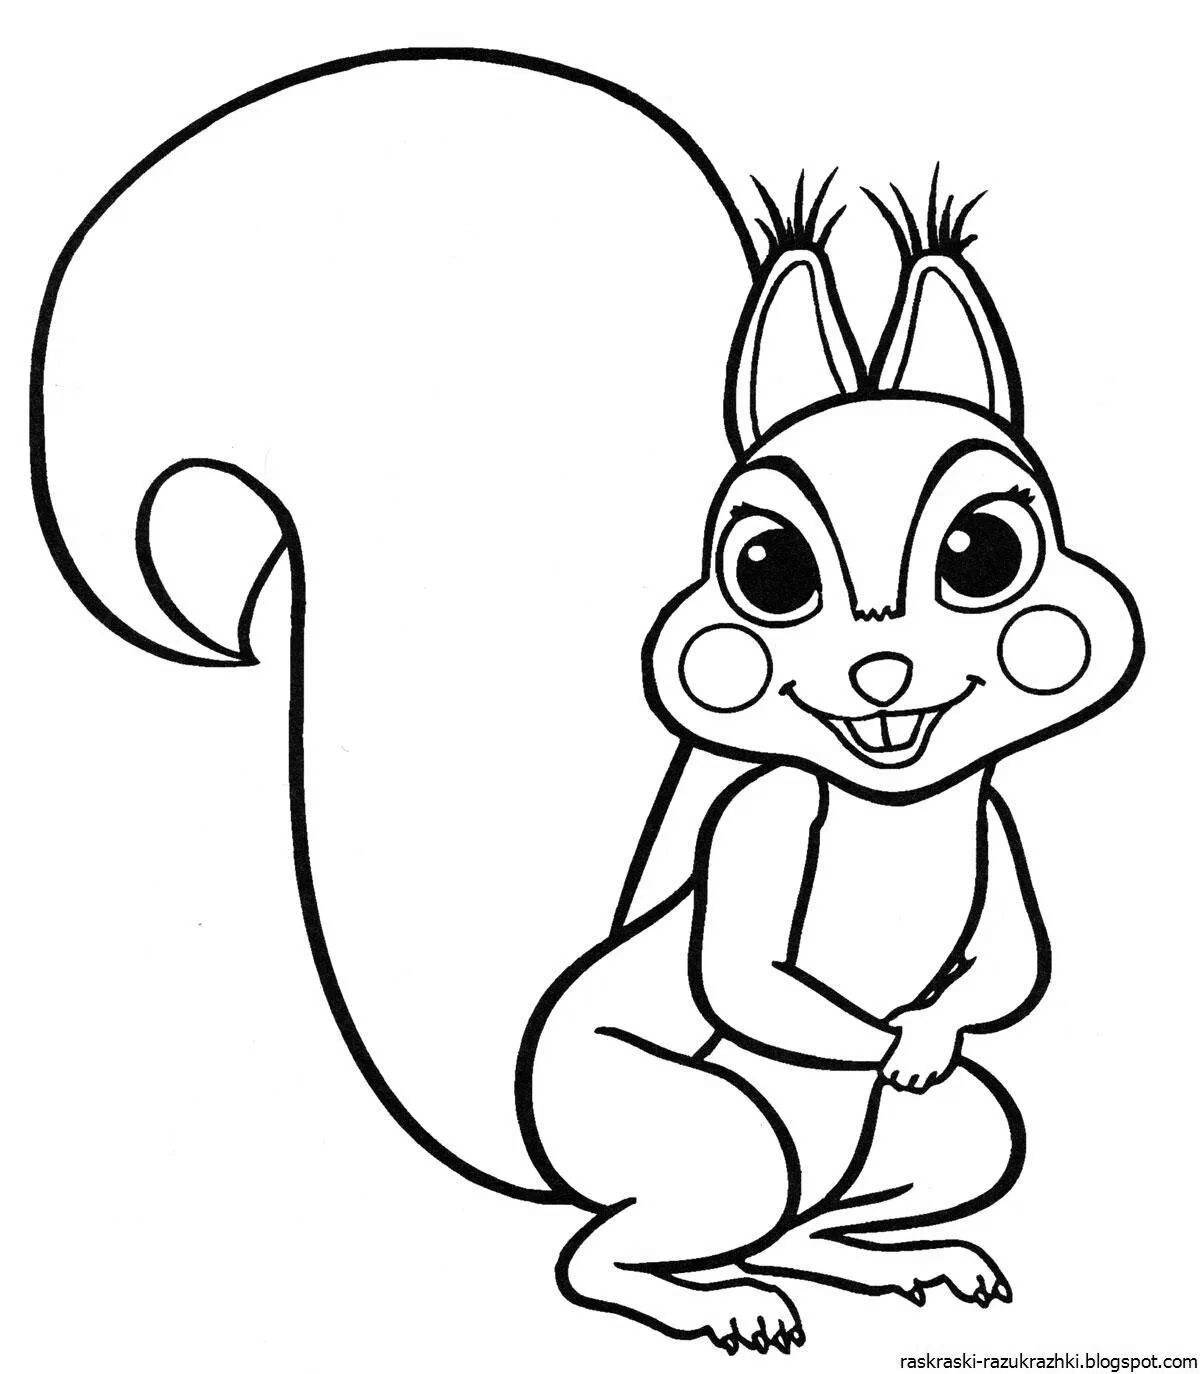 Spectacular squirrel coloring for kids